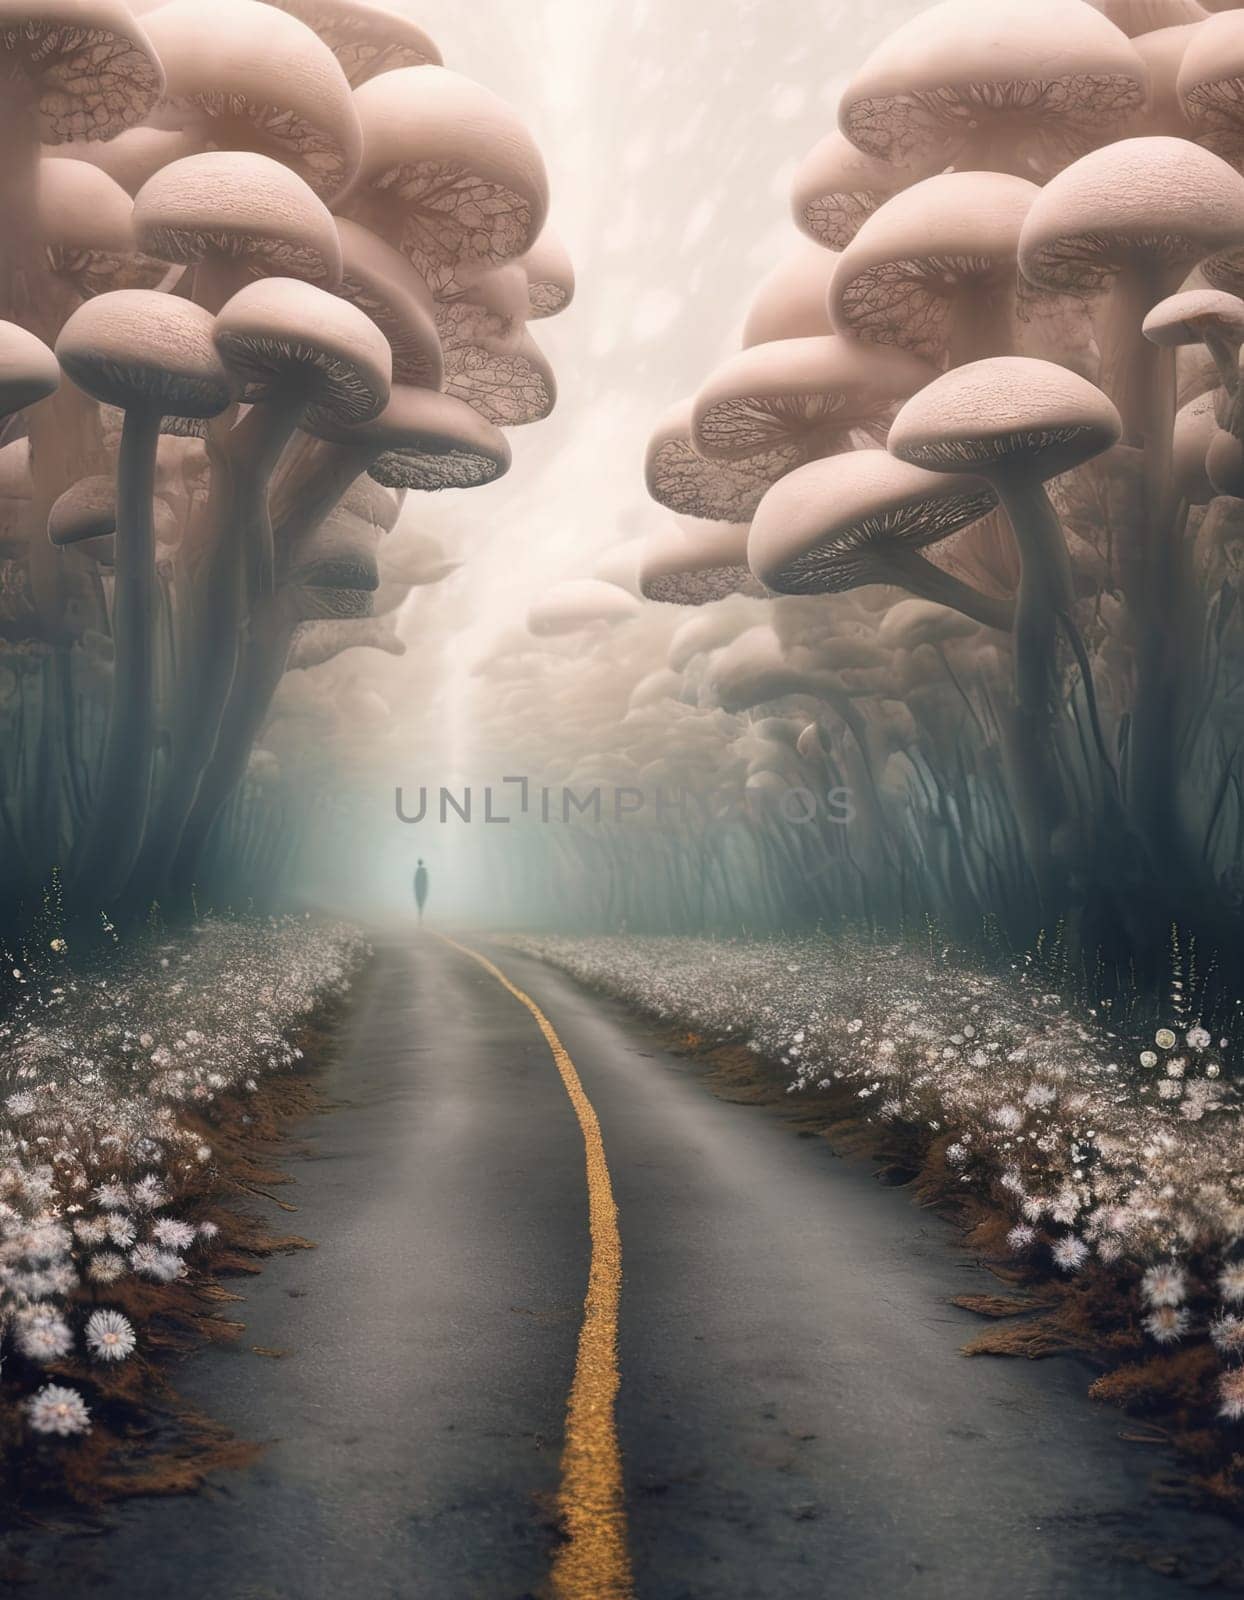 A person is walking down a road in a forest with mushrooms. The mushrooms are large and spread out, creating a surreal and dreamlike atmosphere. by Matiunina